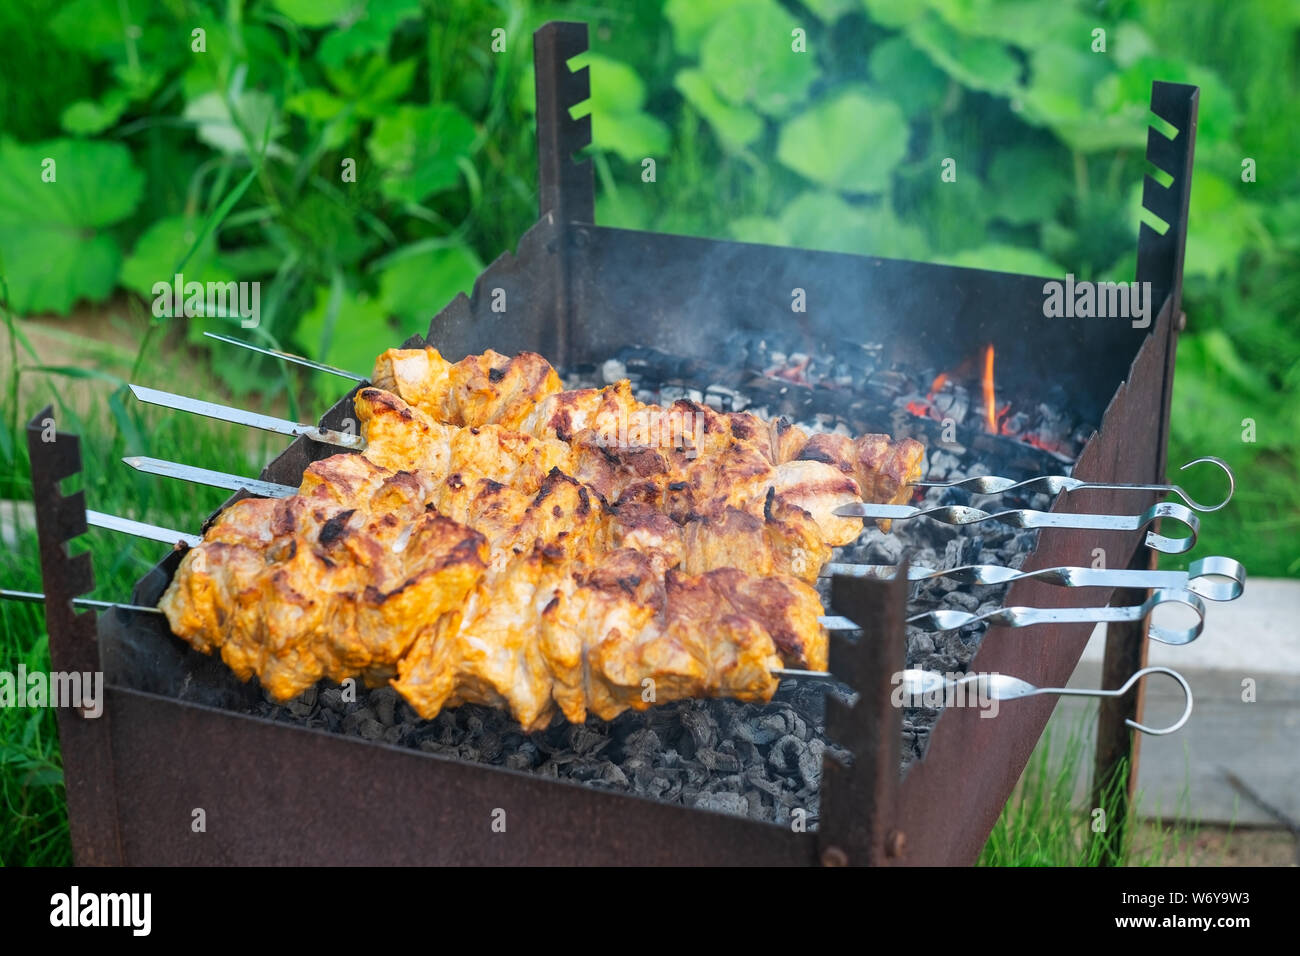 Shish kebab in process of cooking on open fire Stock Photo